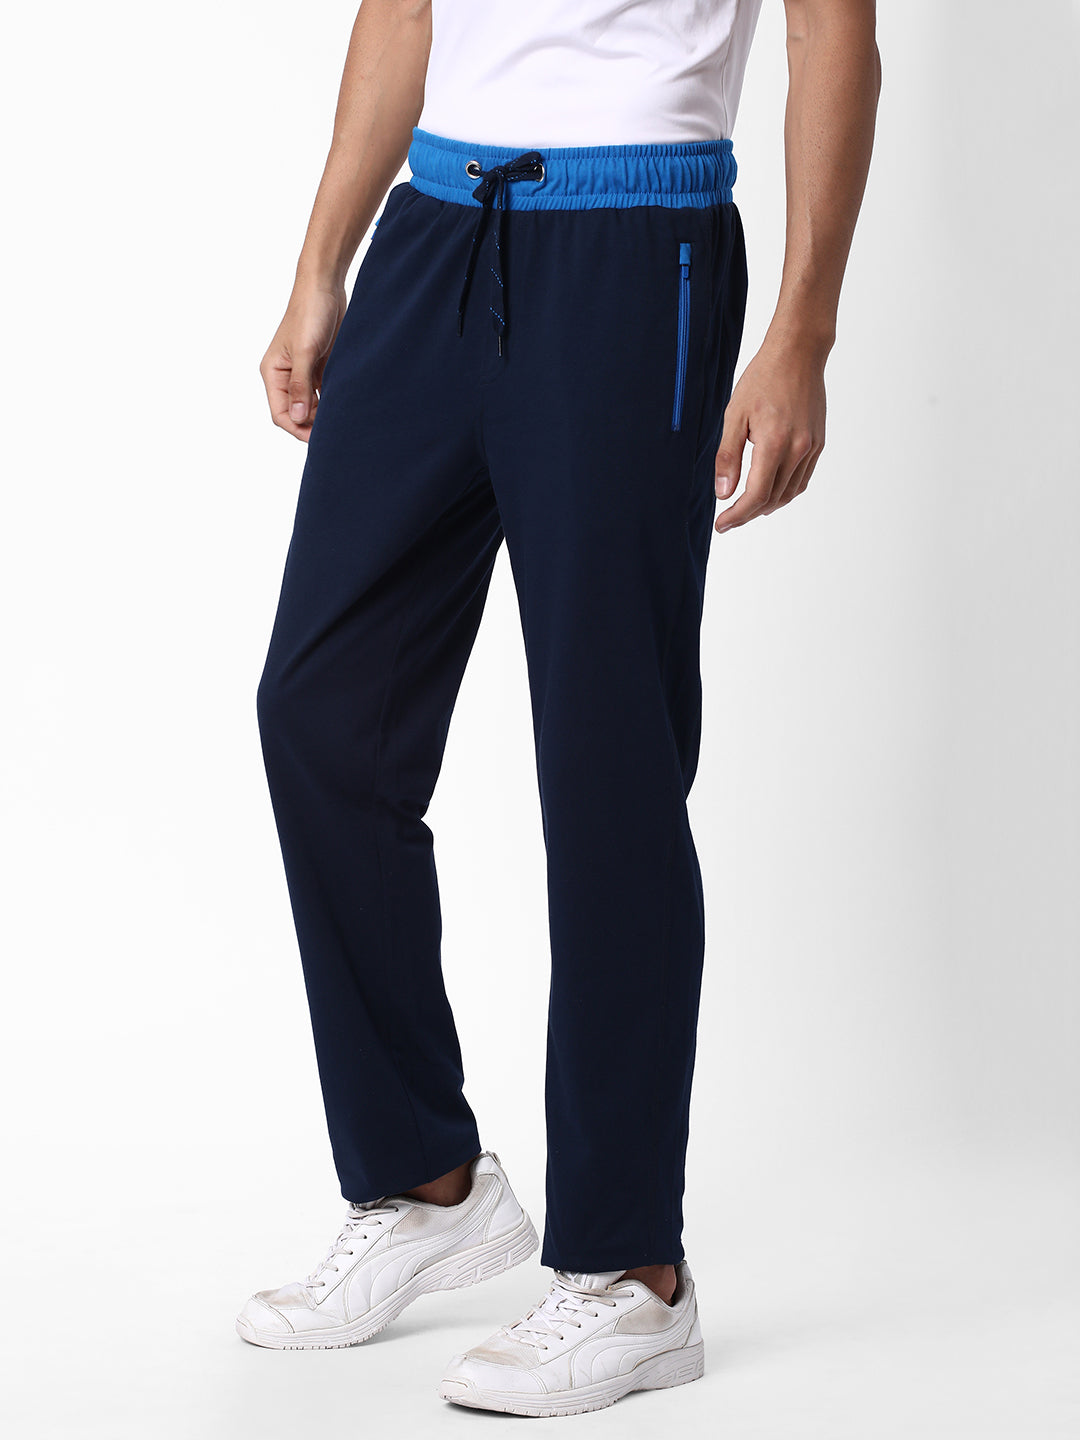 Buy Jockey AM44 Slim Fit Track Pant With Drawstring Closure And Zipper  Pocket Navy L Online at Low Prices in India at Bigdeals24x7.com